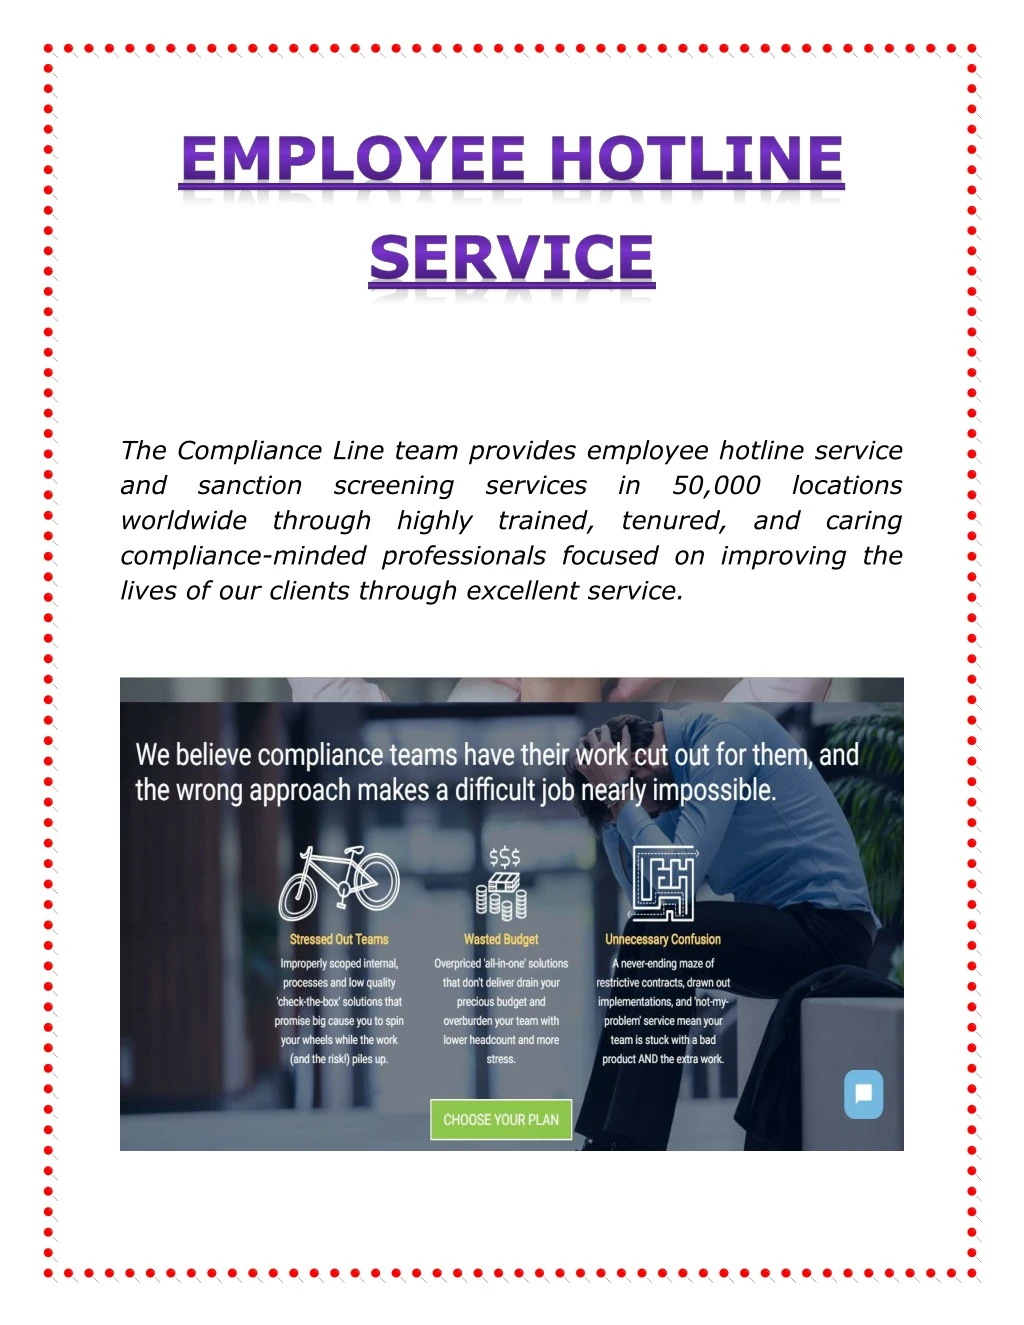 the compliance line team provides employee